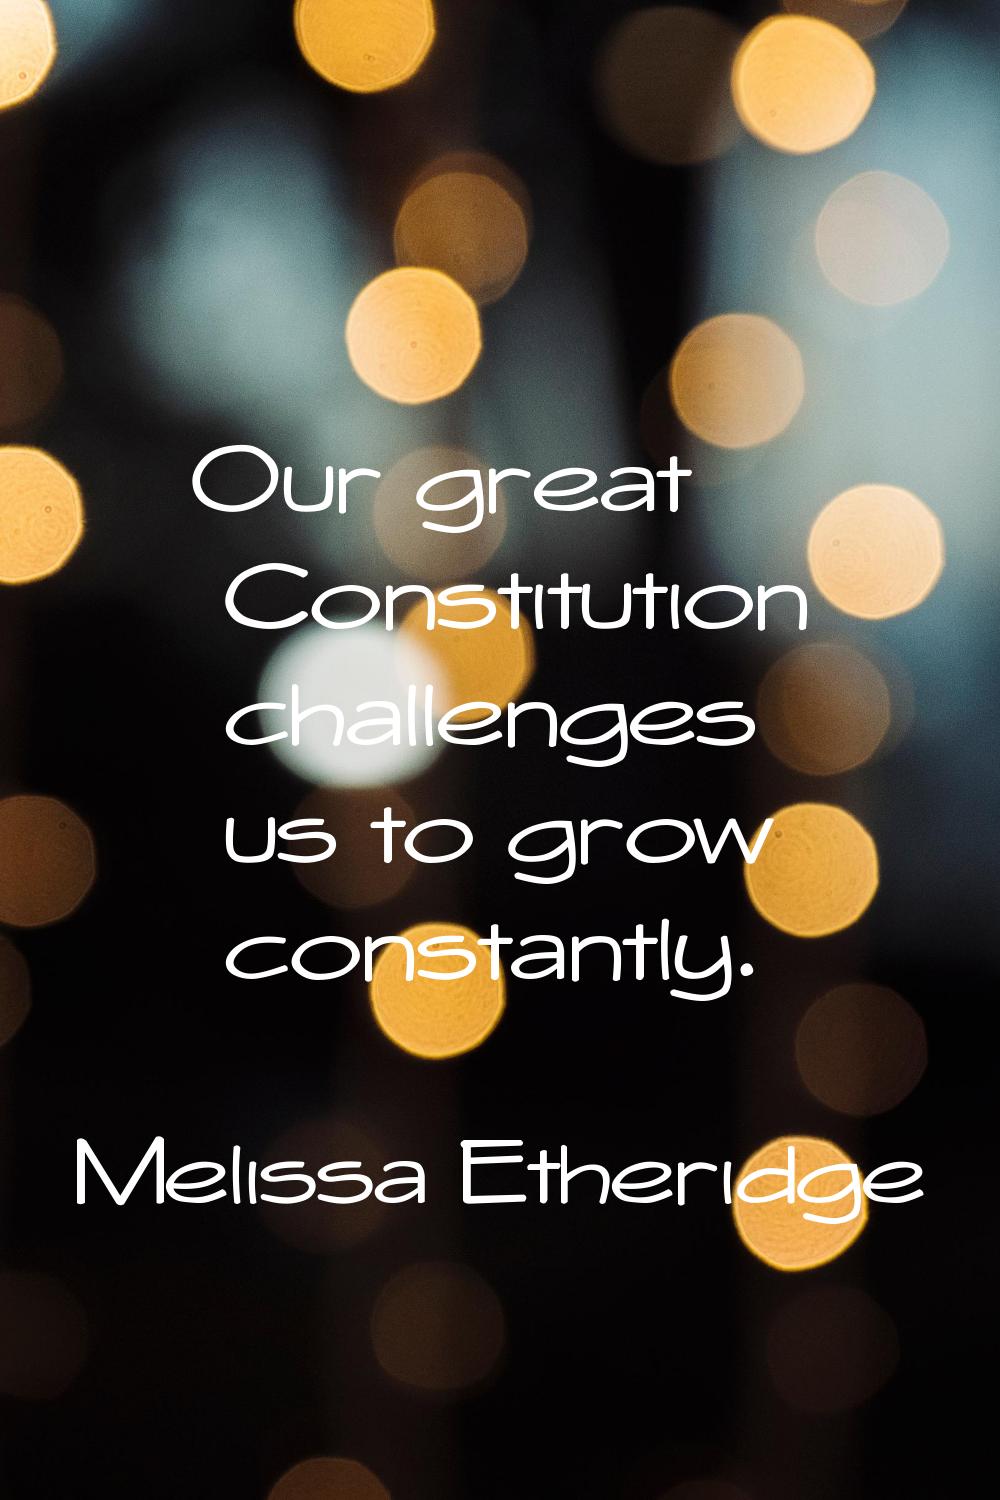 Our great Constitution challenges us to grow constantly.